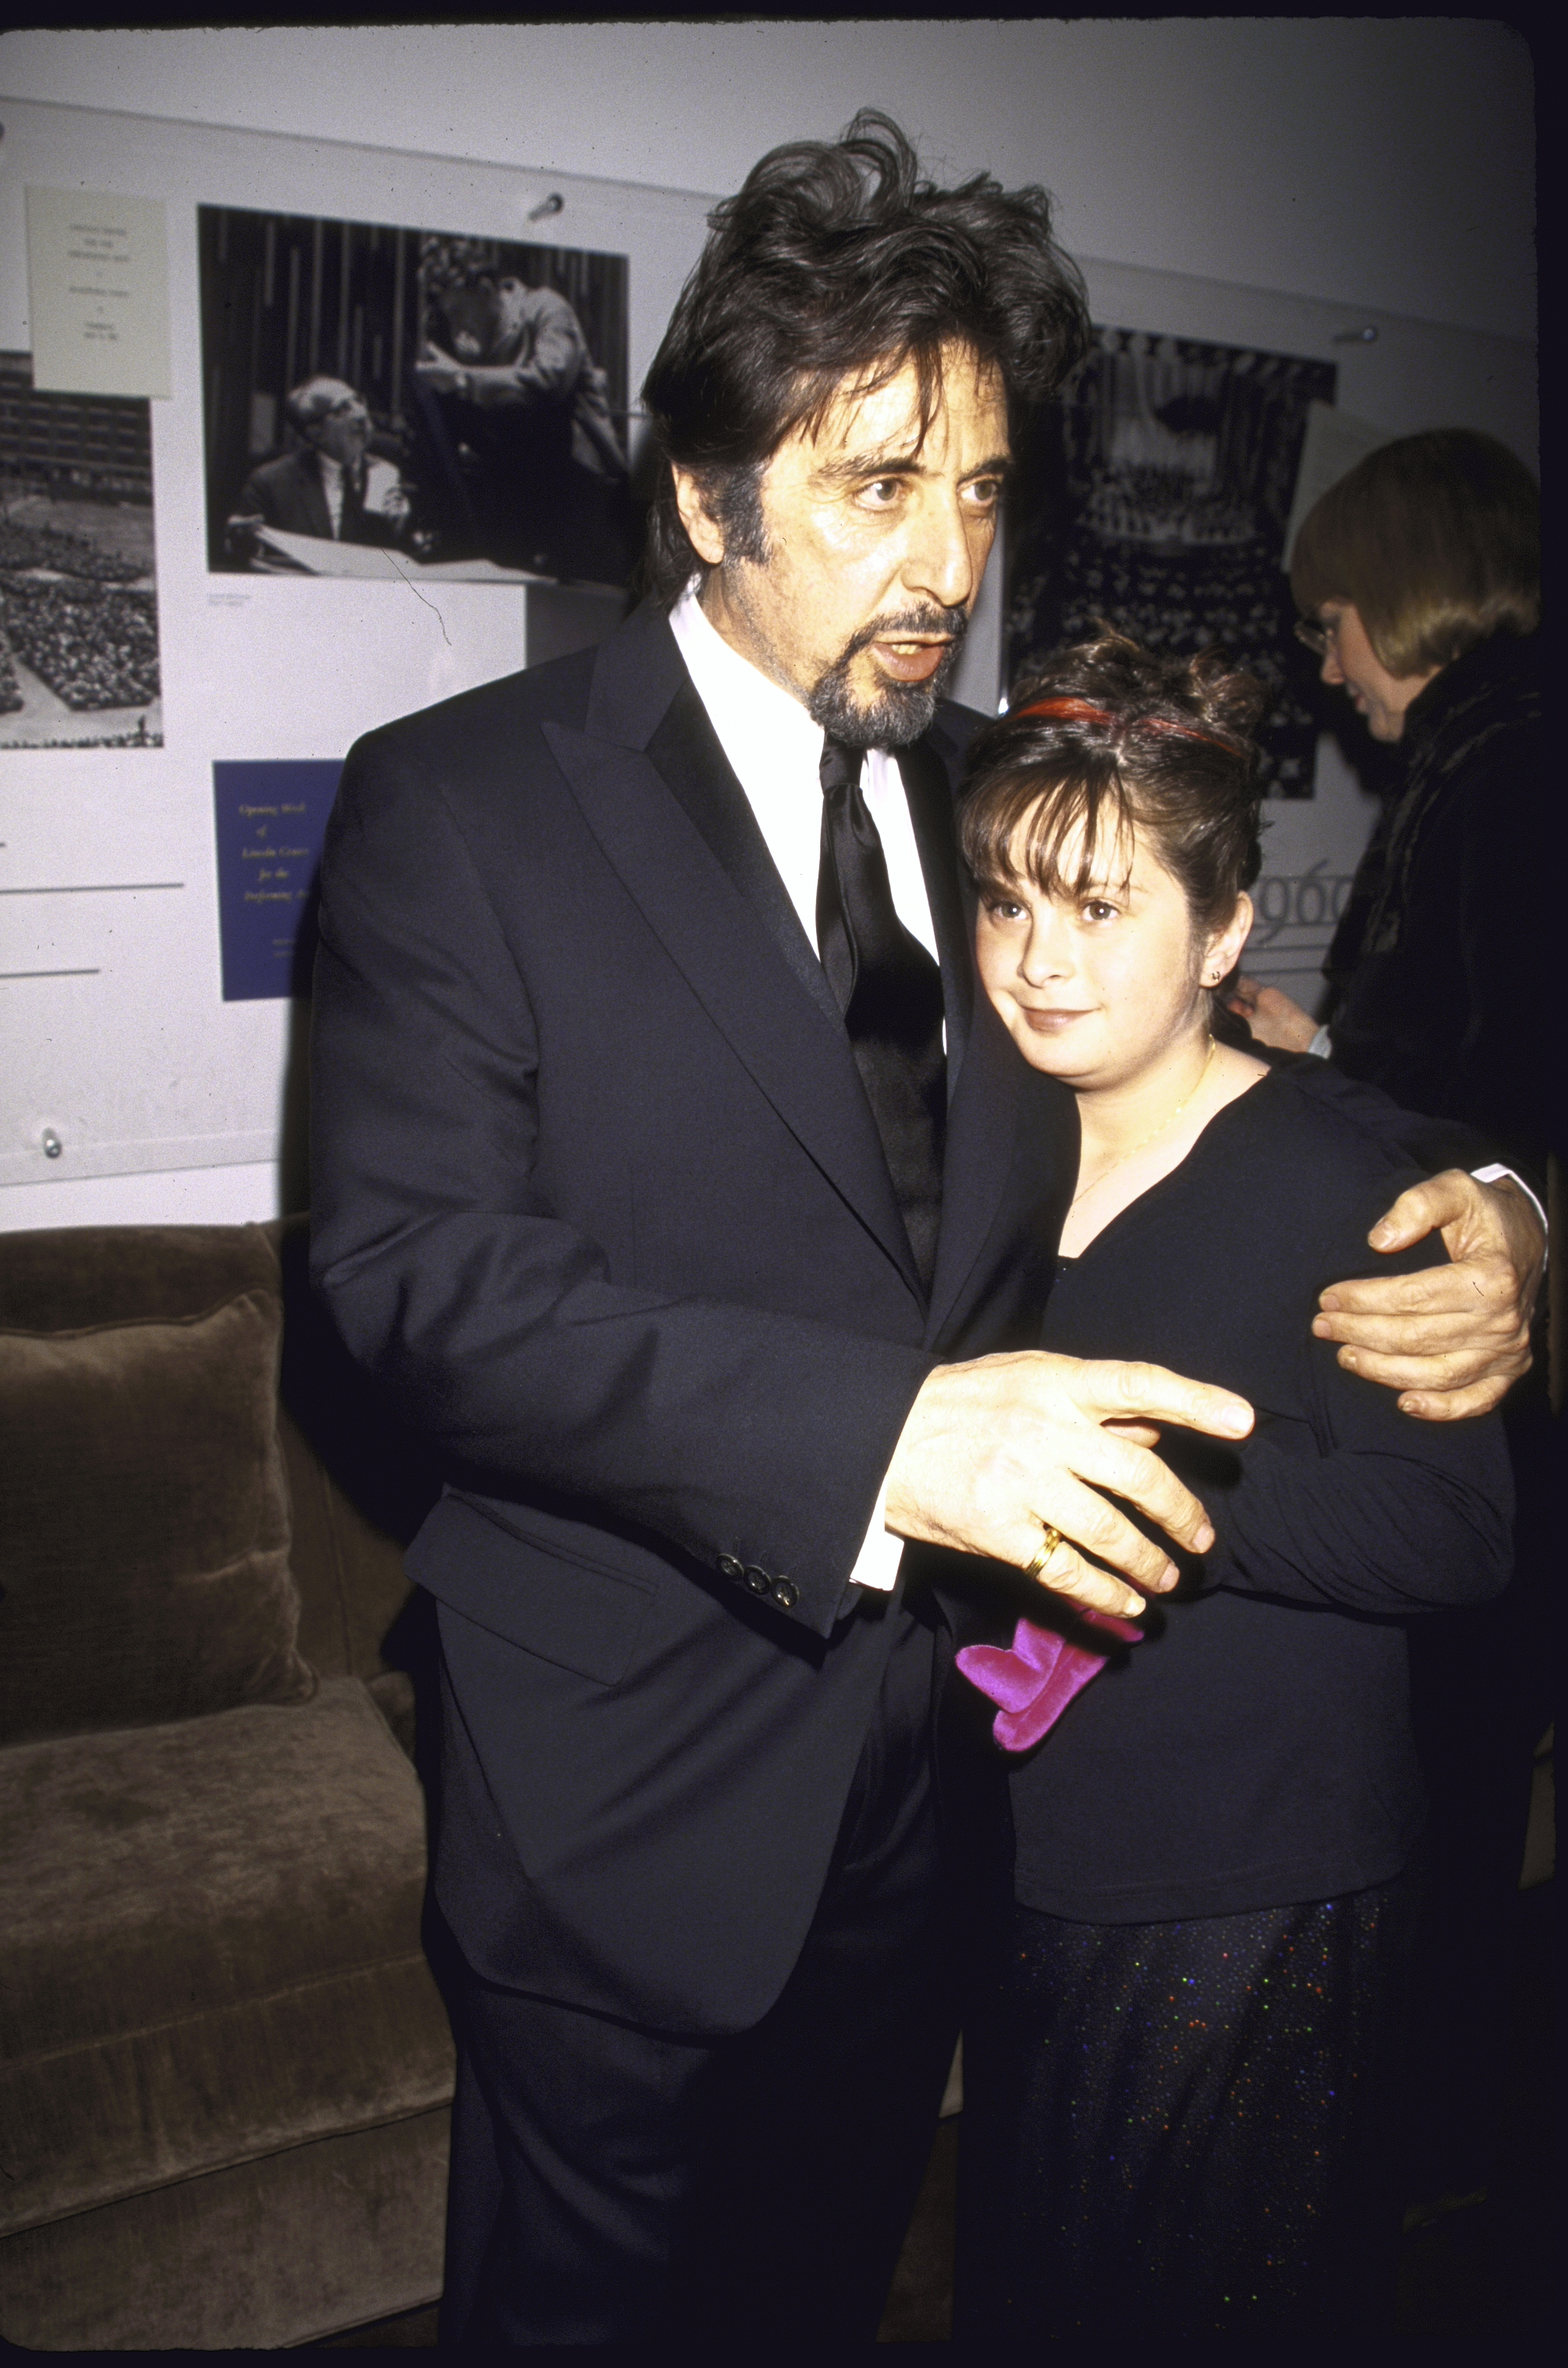 <p>Al Pacino's 10-year-old daughter Julie -- whose mom is the screen legend's ex-girlfriend Jan Tarrant, an acting coach -- joined him at the Film Society Tribute to Pacino on April 25, 2000. Keep reading to see Al's twins when they were young, next...</p>